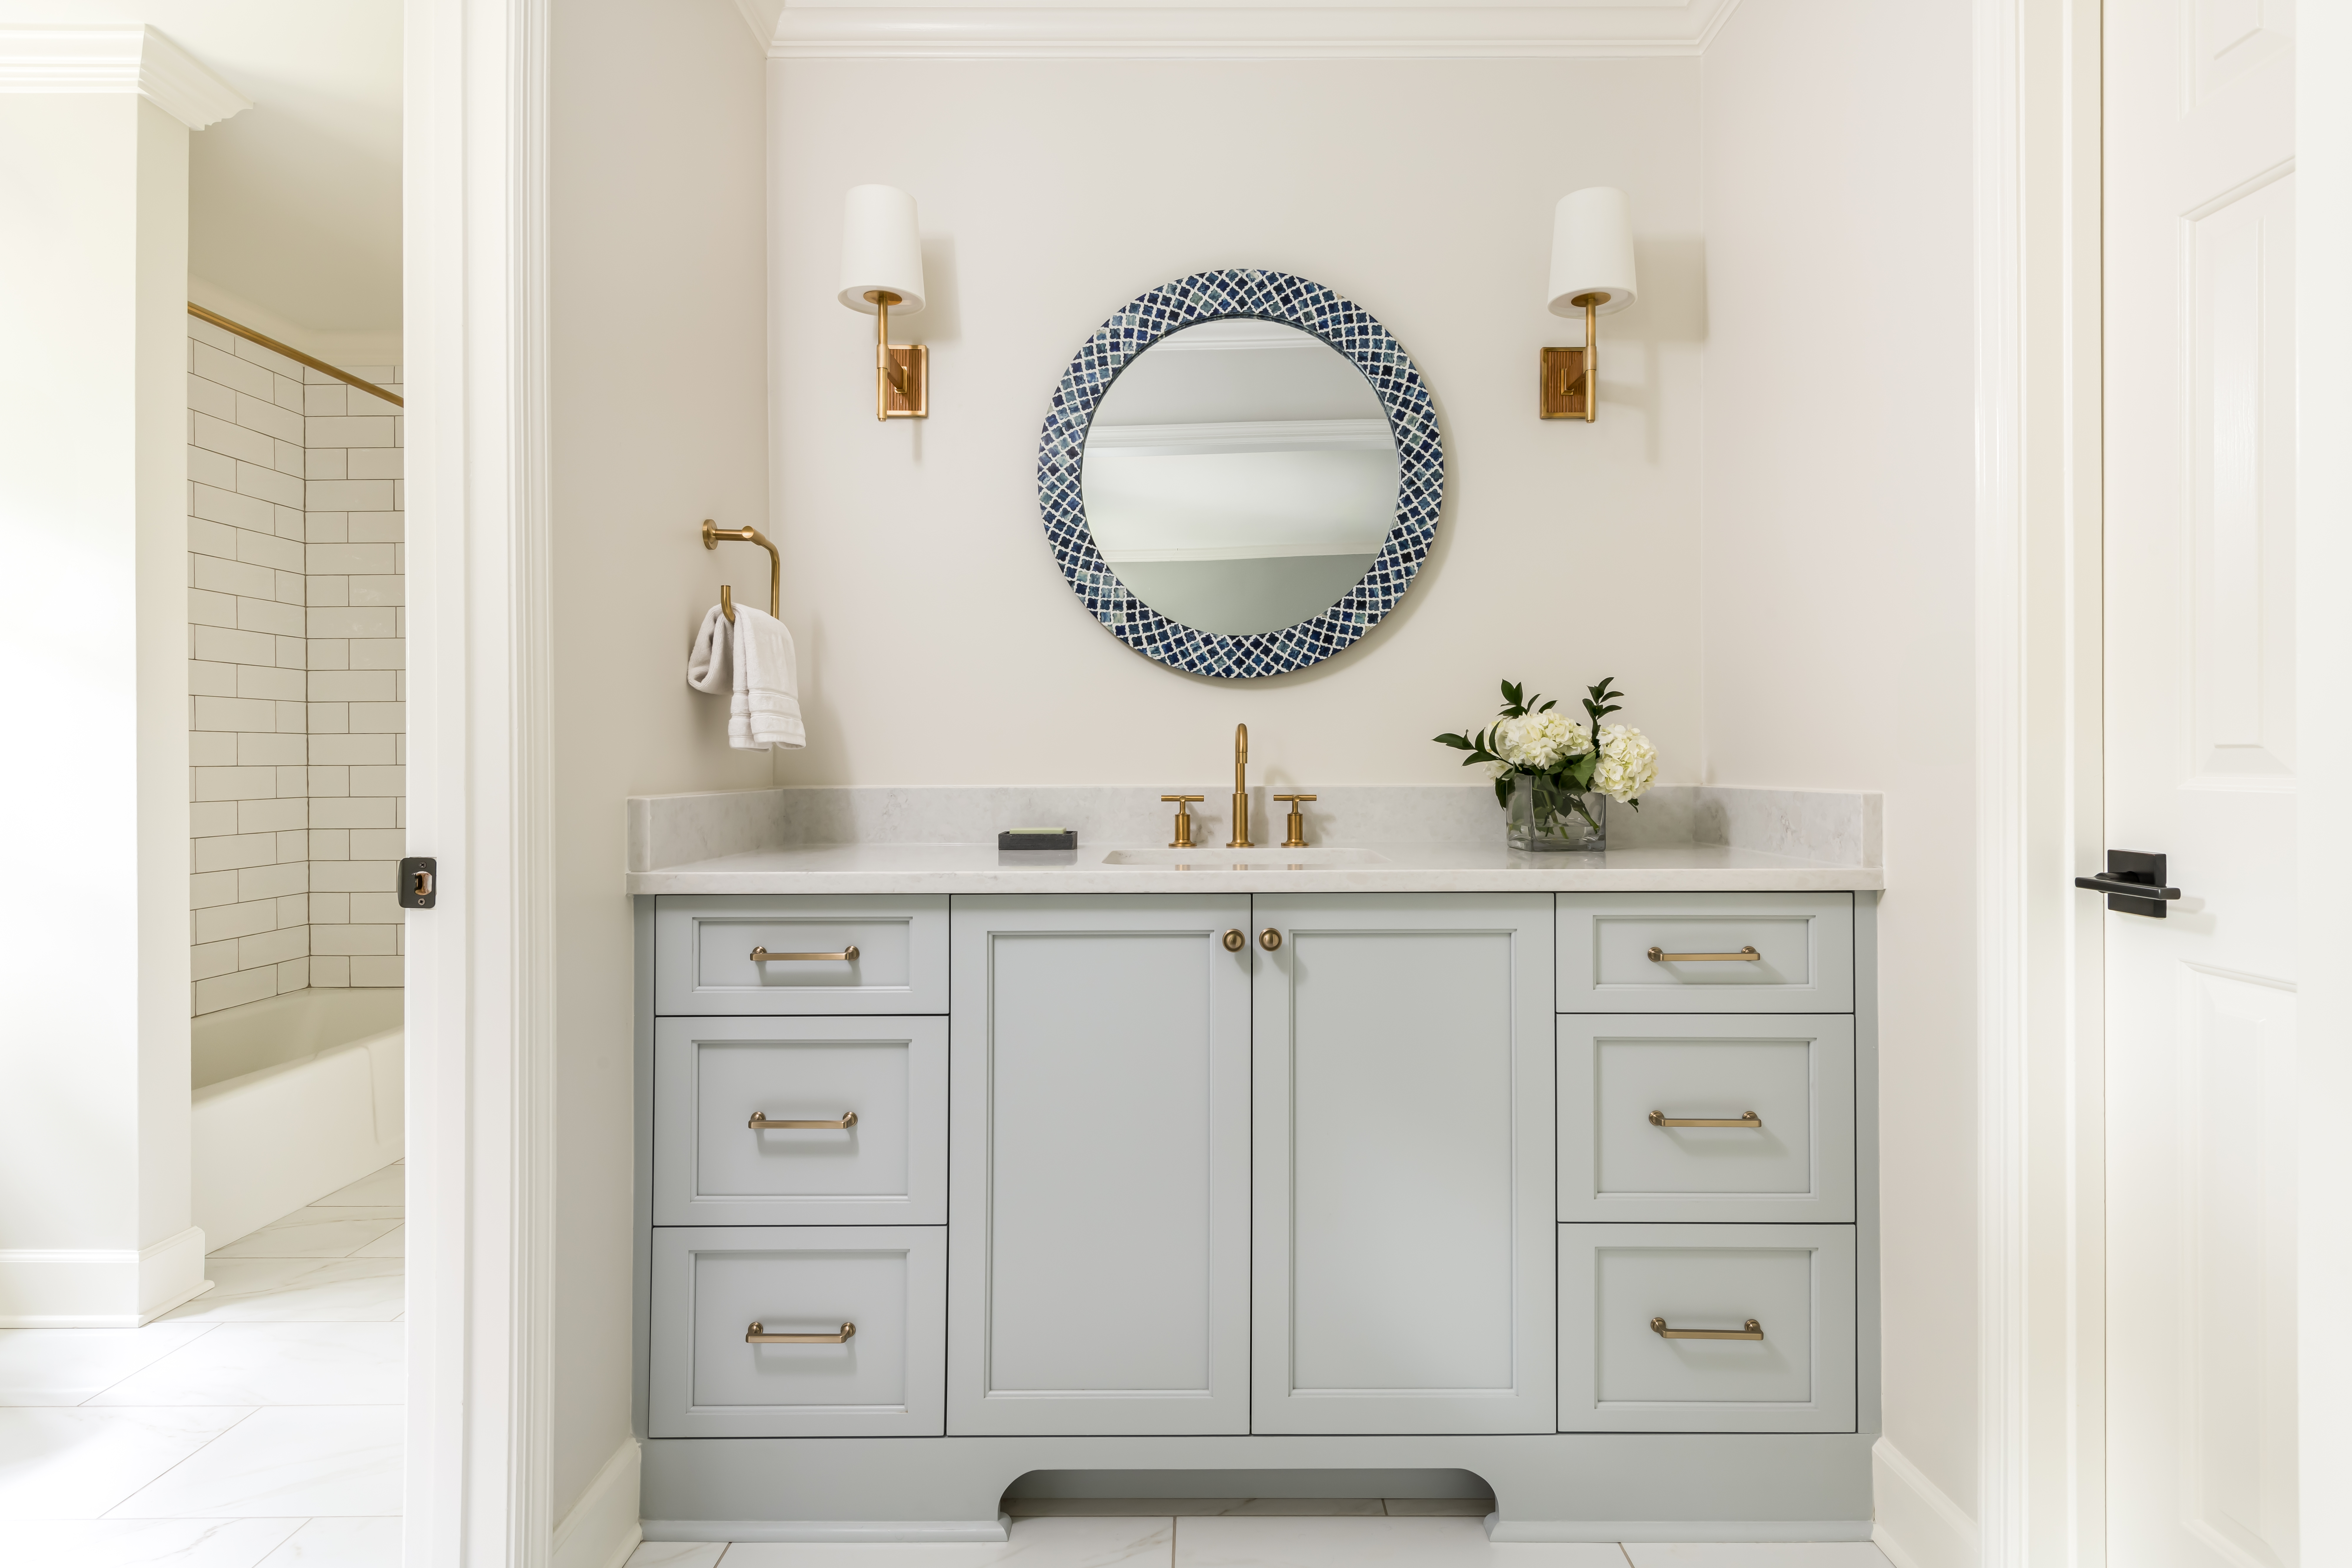 sink & vanity with circle mirror above it